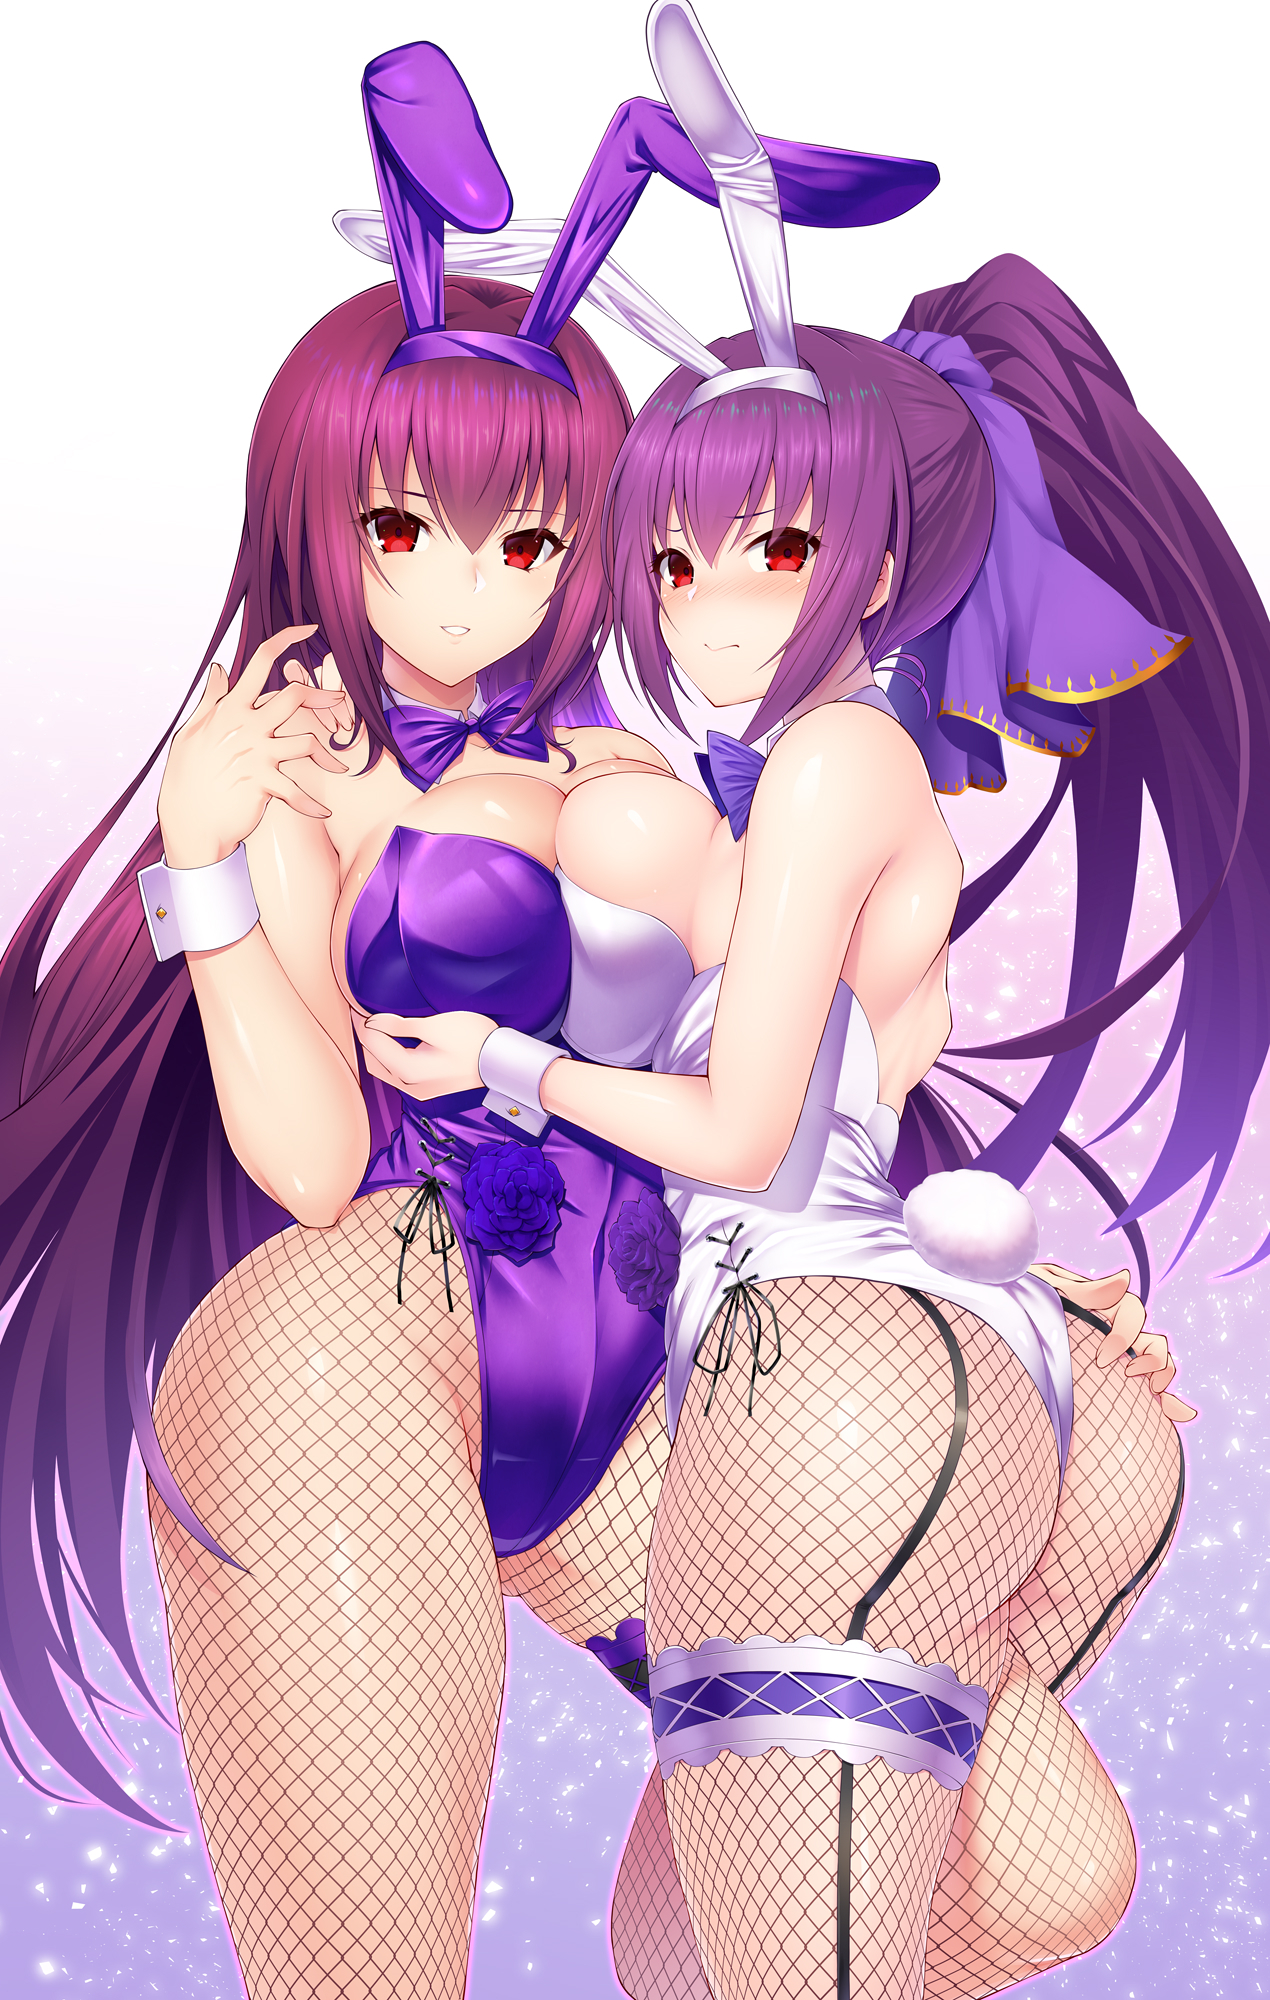 Anime 1270x2000 anime anime girls red eyes ass fishnet pantyhose Scathach Fate/Grand Order Emanon 123 Fate series bunny suit boobs on boobs big boobs purple hair long hair ponytail blushing Scathach Skadi